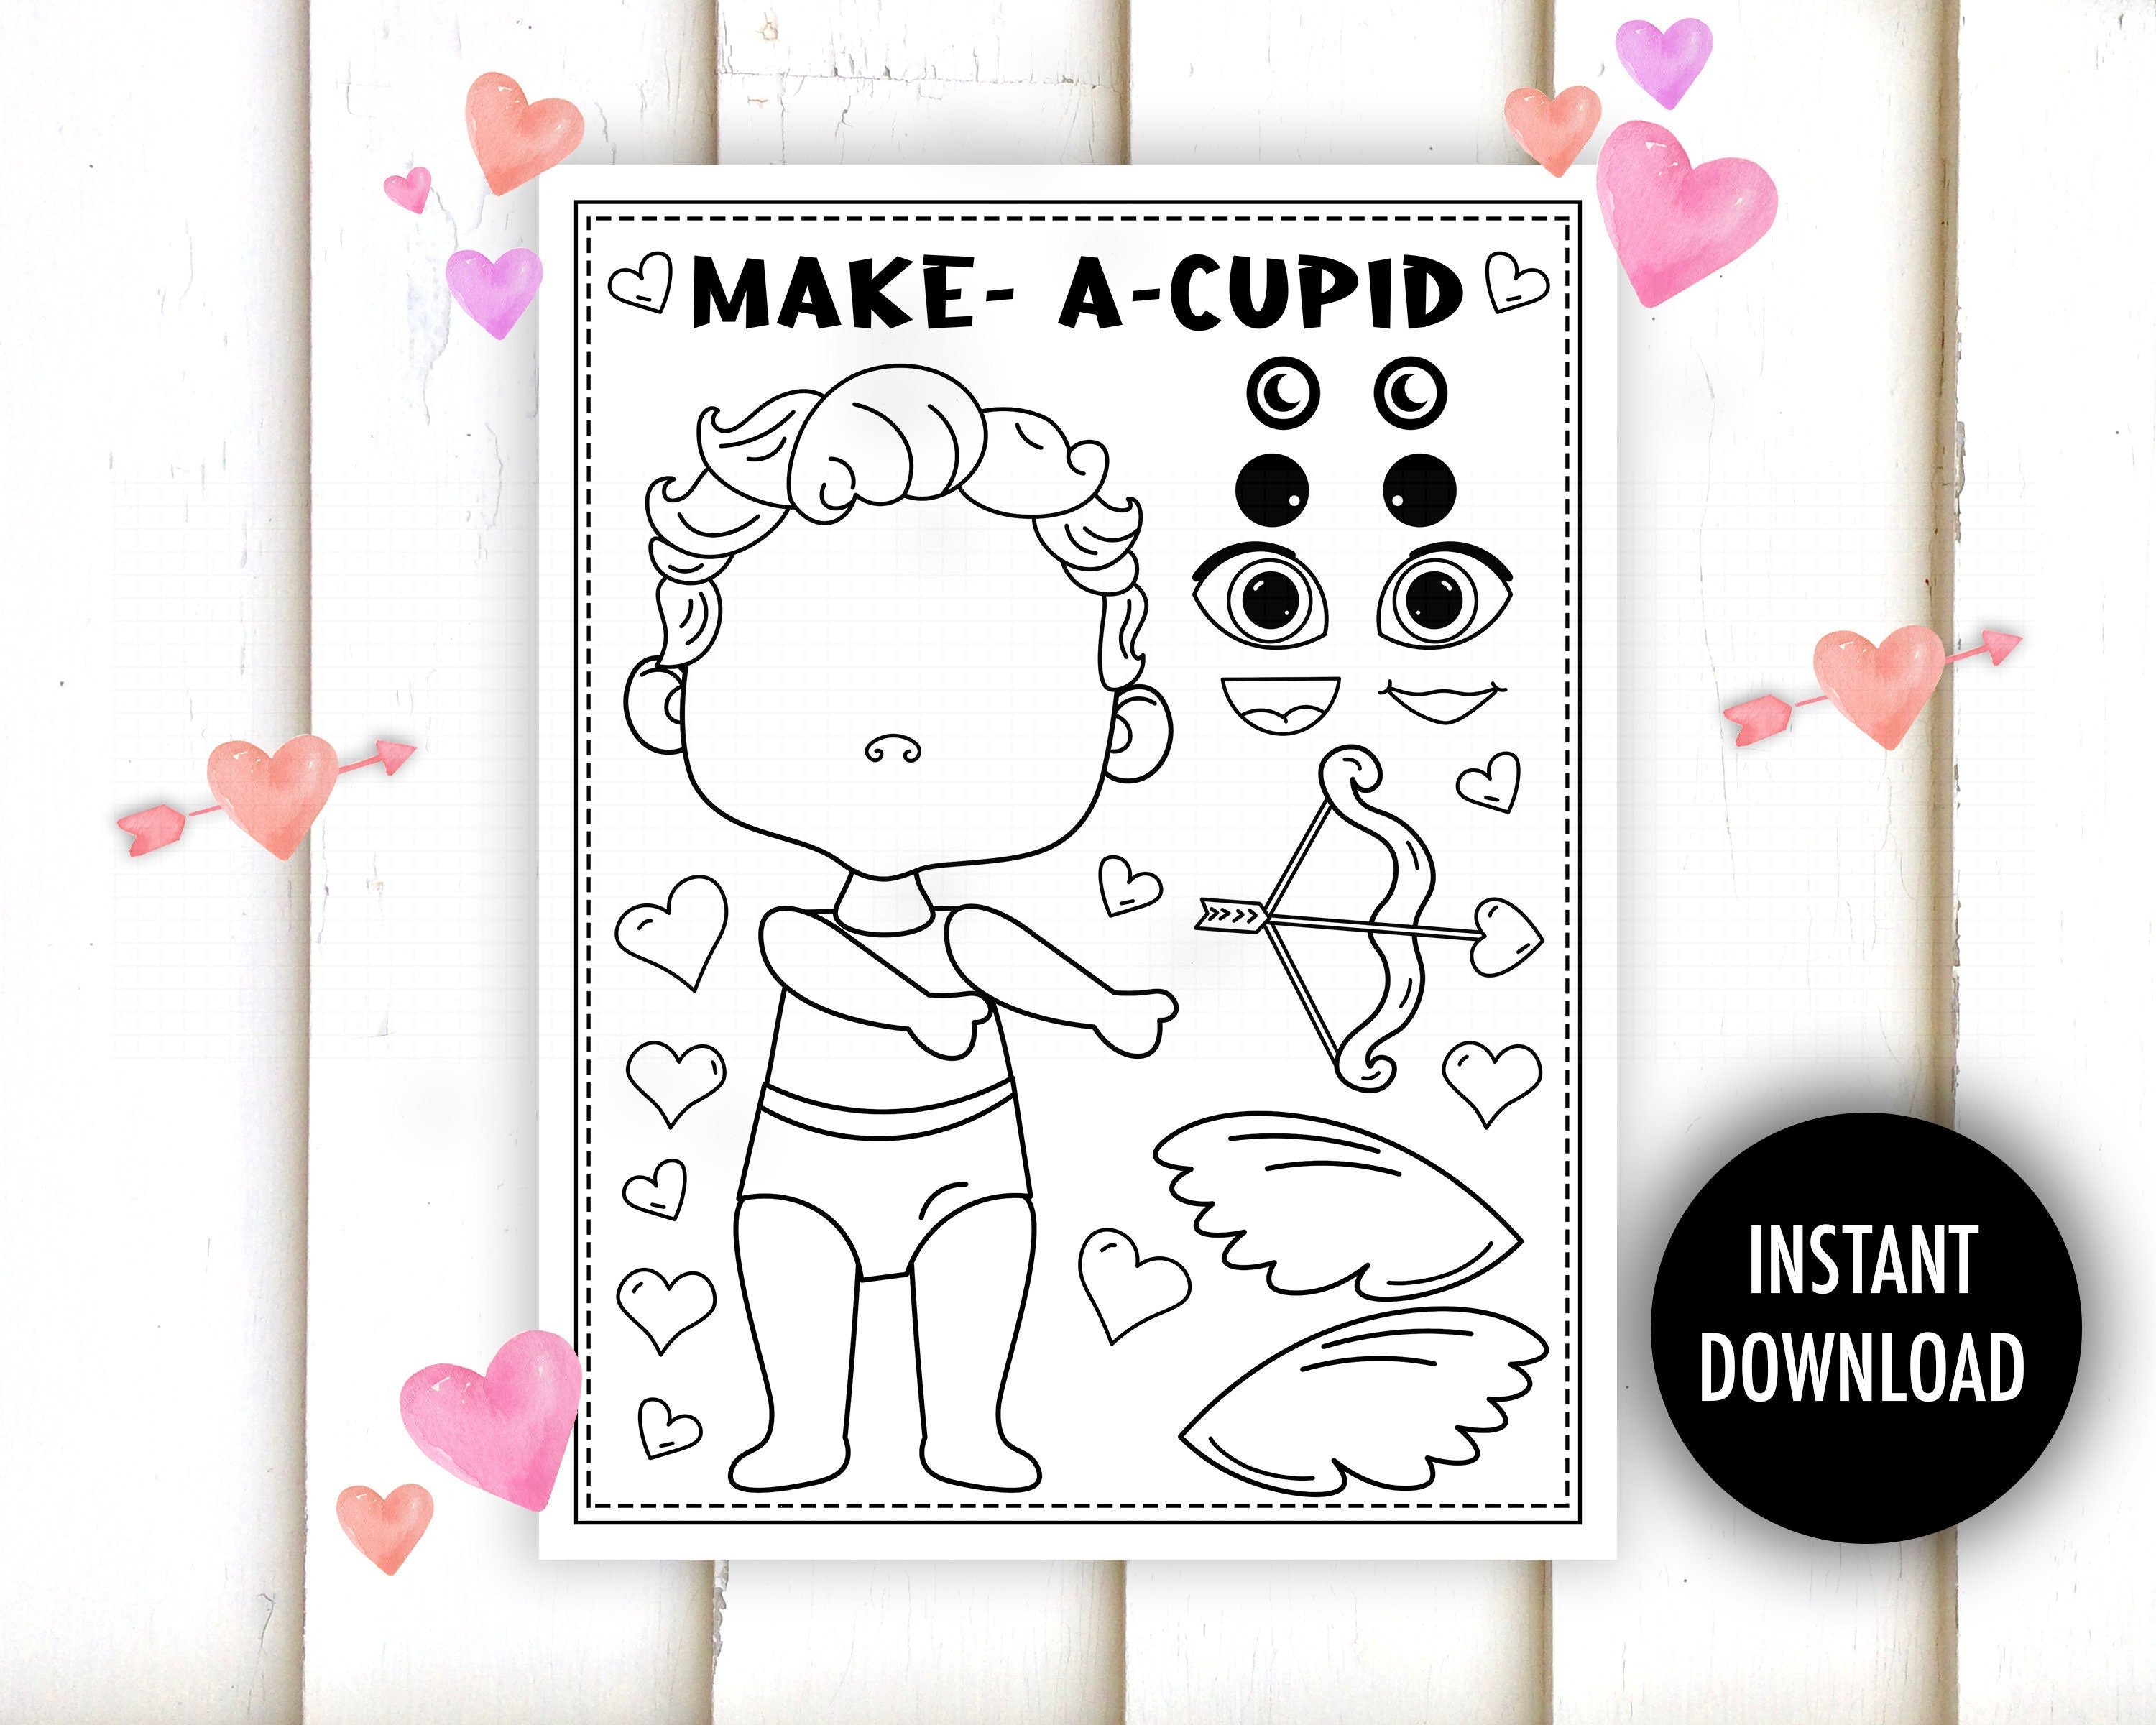 Valentines Crafts for Kids and Printable Activity Pack